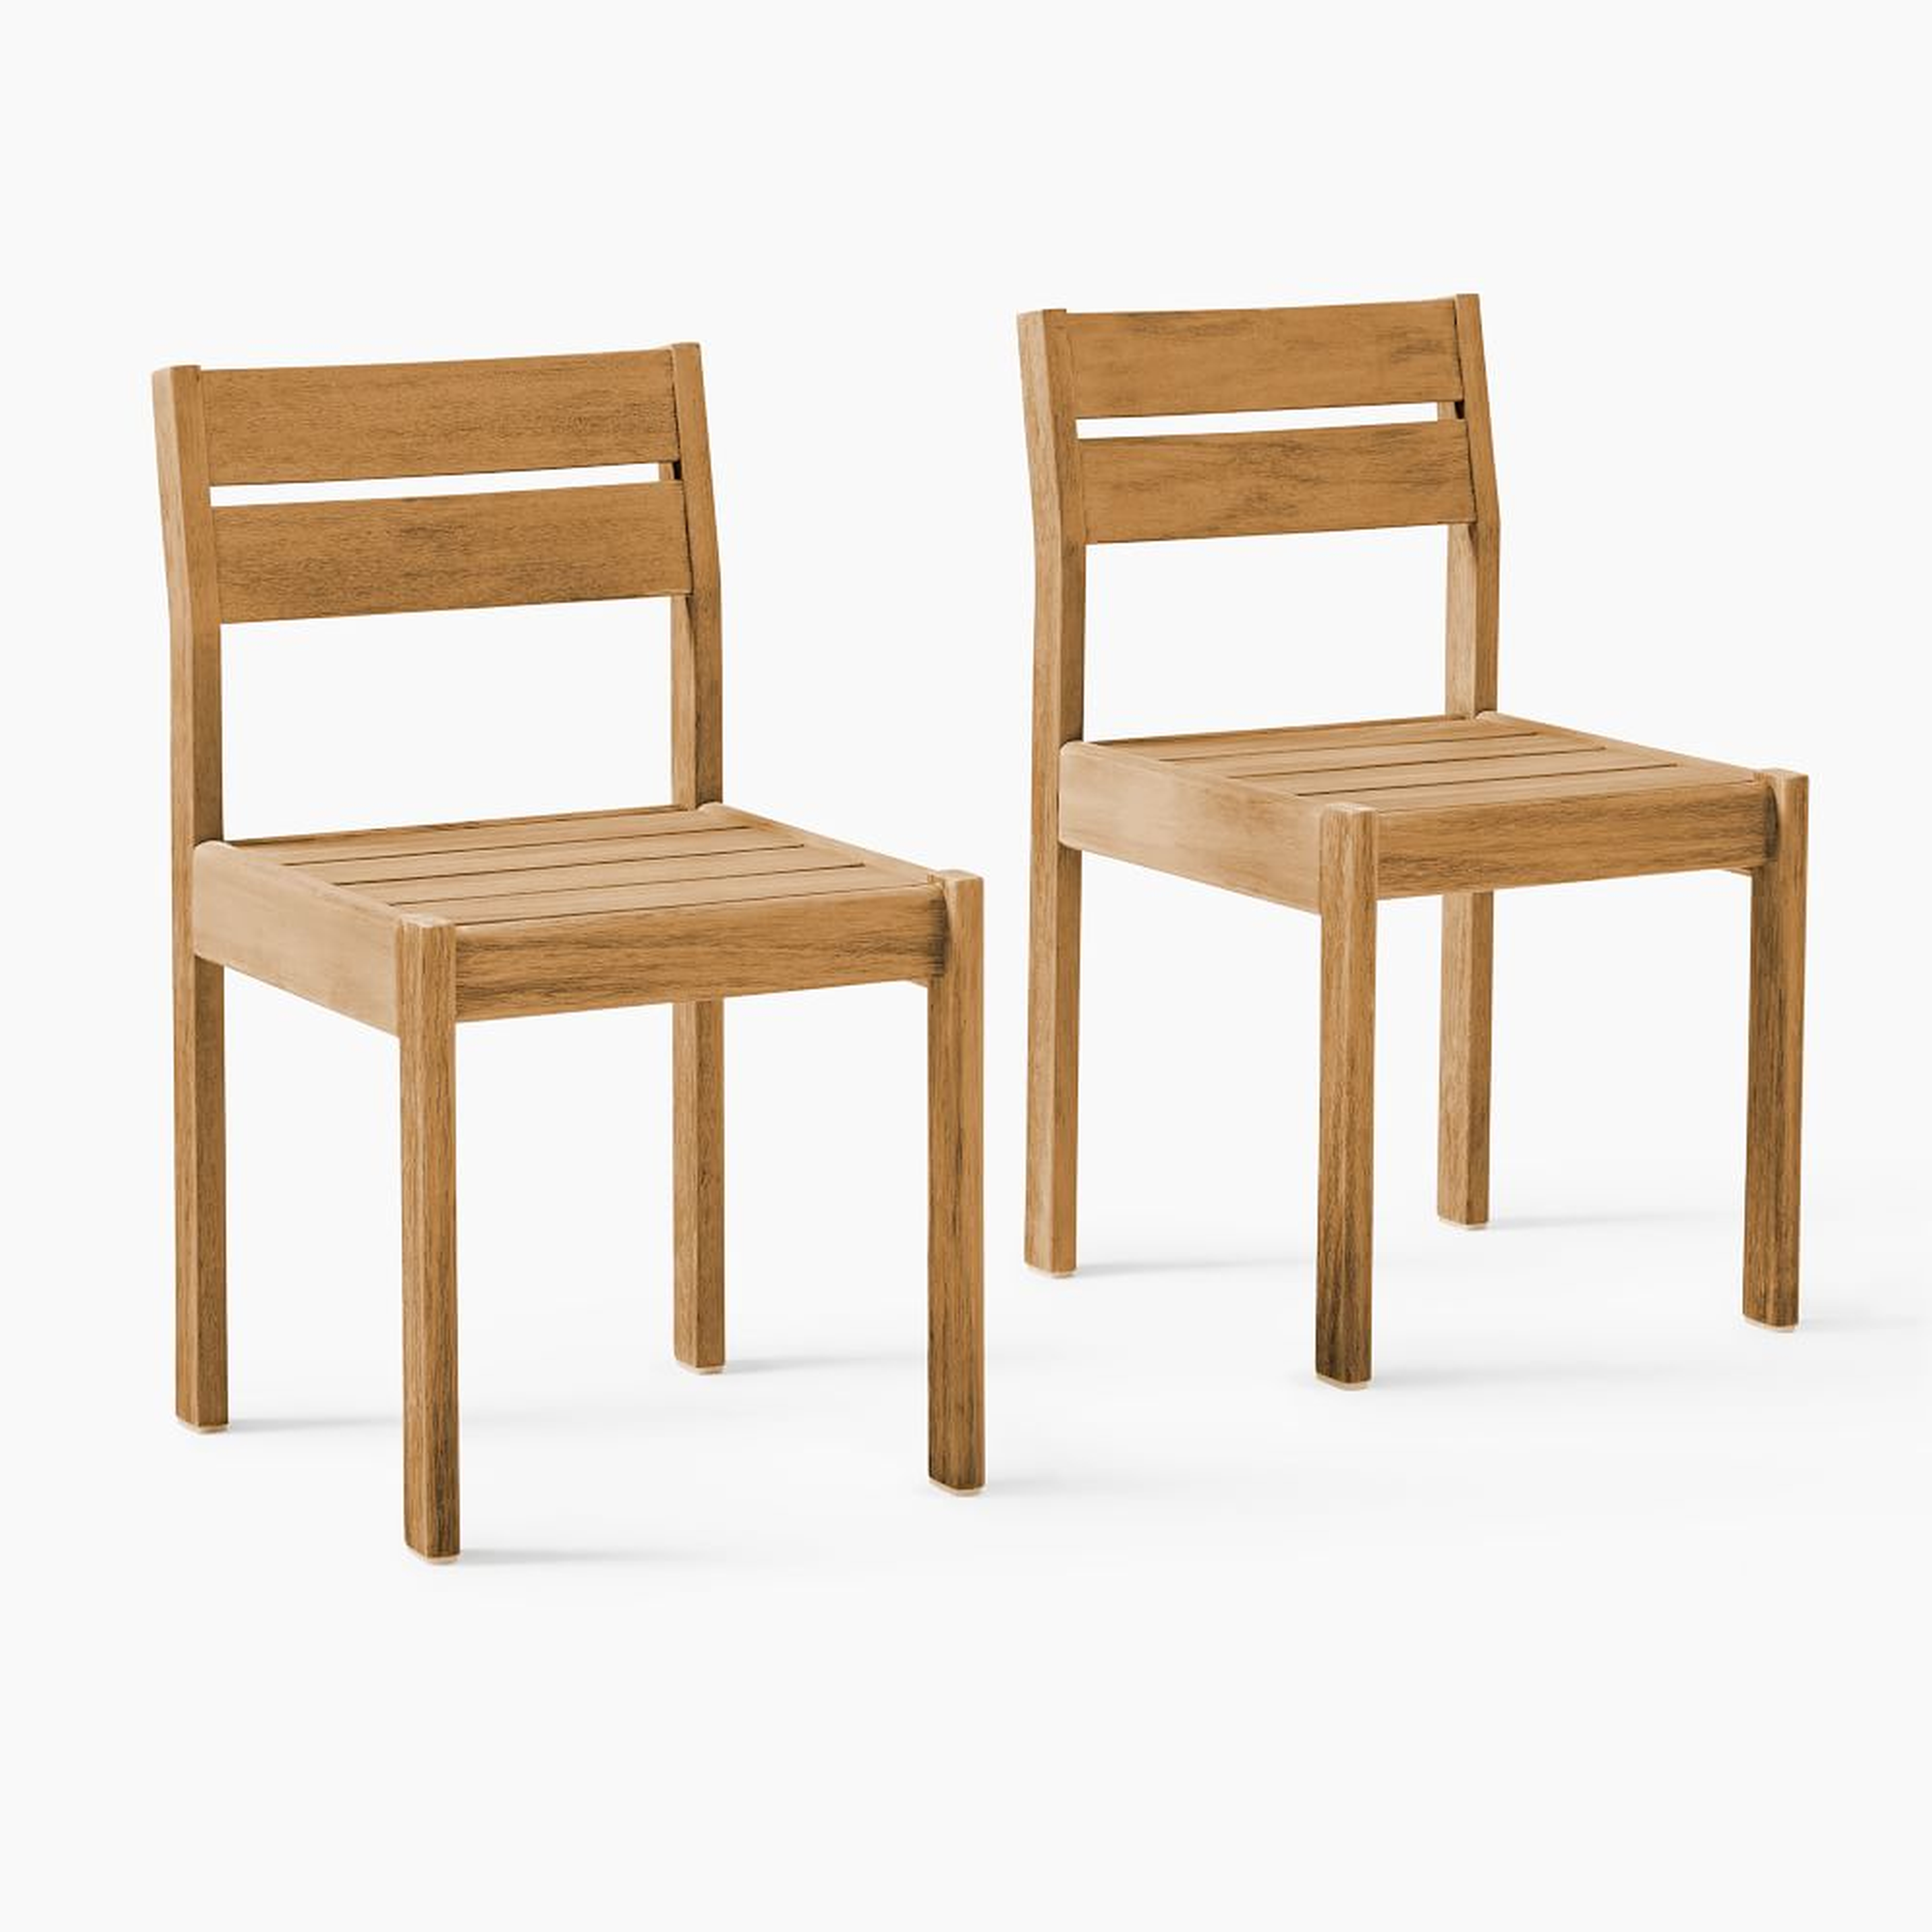 Playa Outdoor Dining Chair, Set of 2 - West Elm